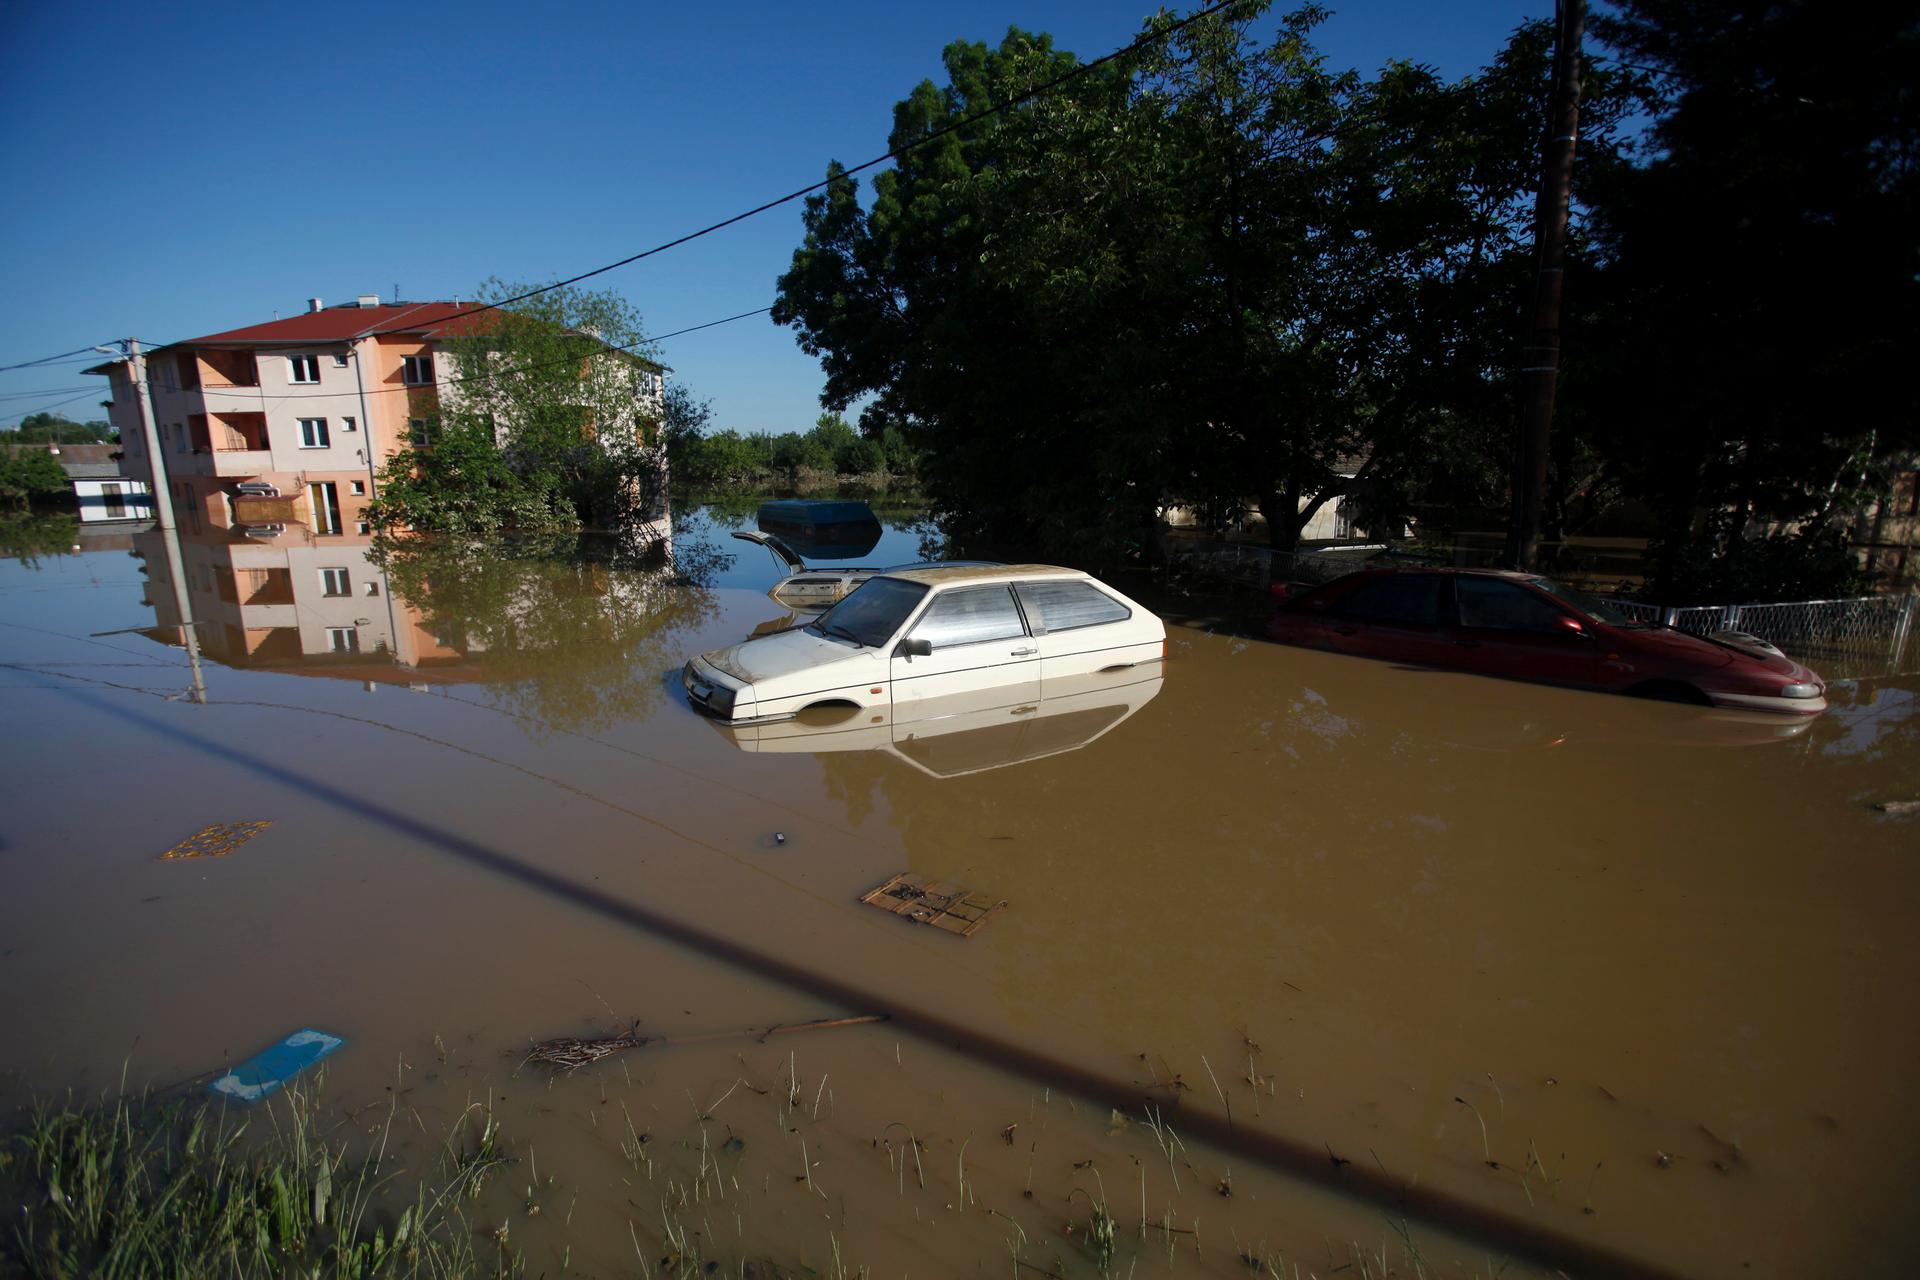 A car is seen stranded in the flooded town of Obrenovac, southwest of Belgrade.